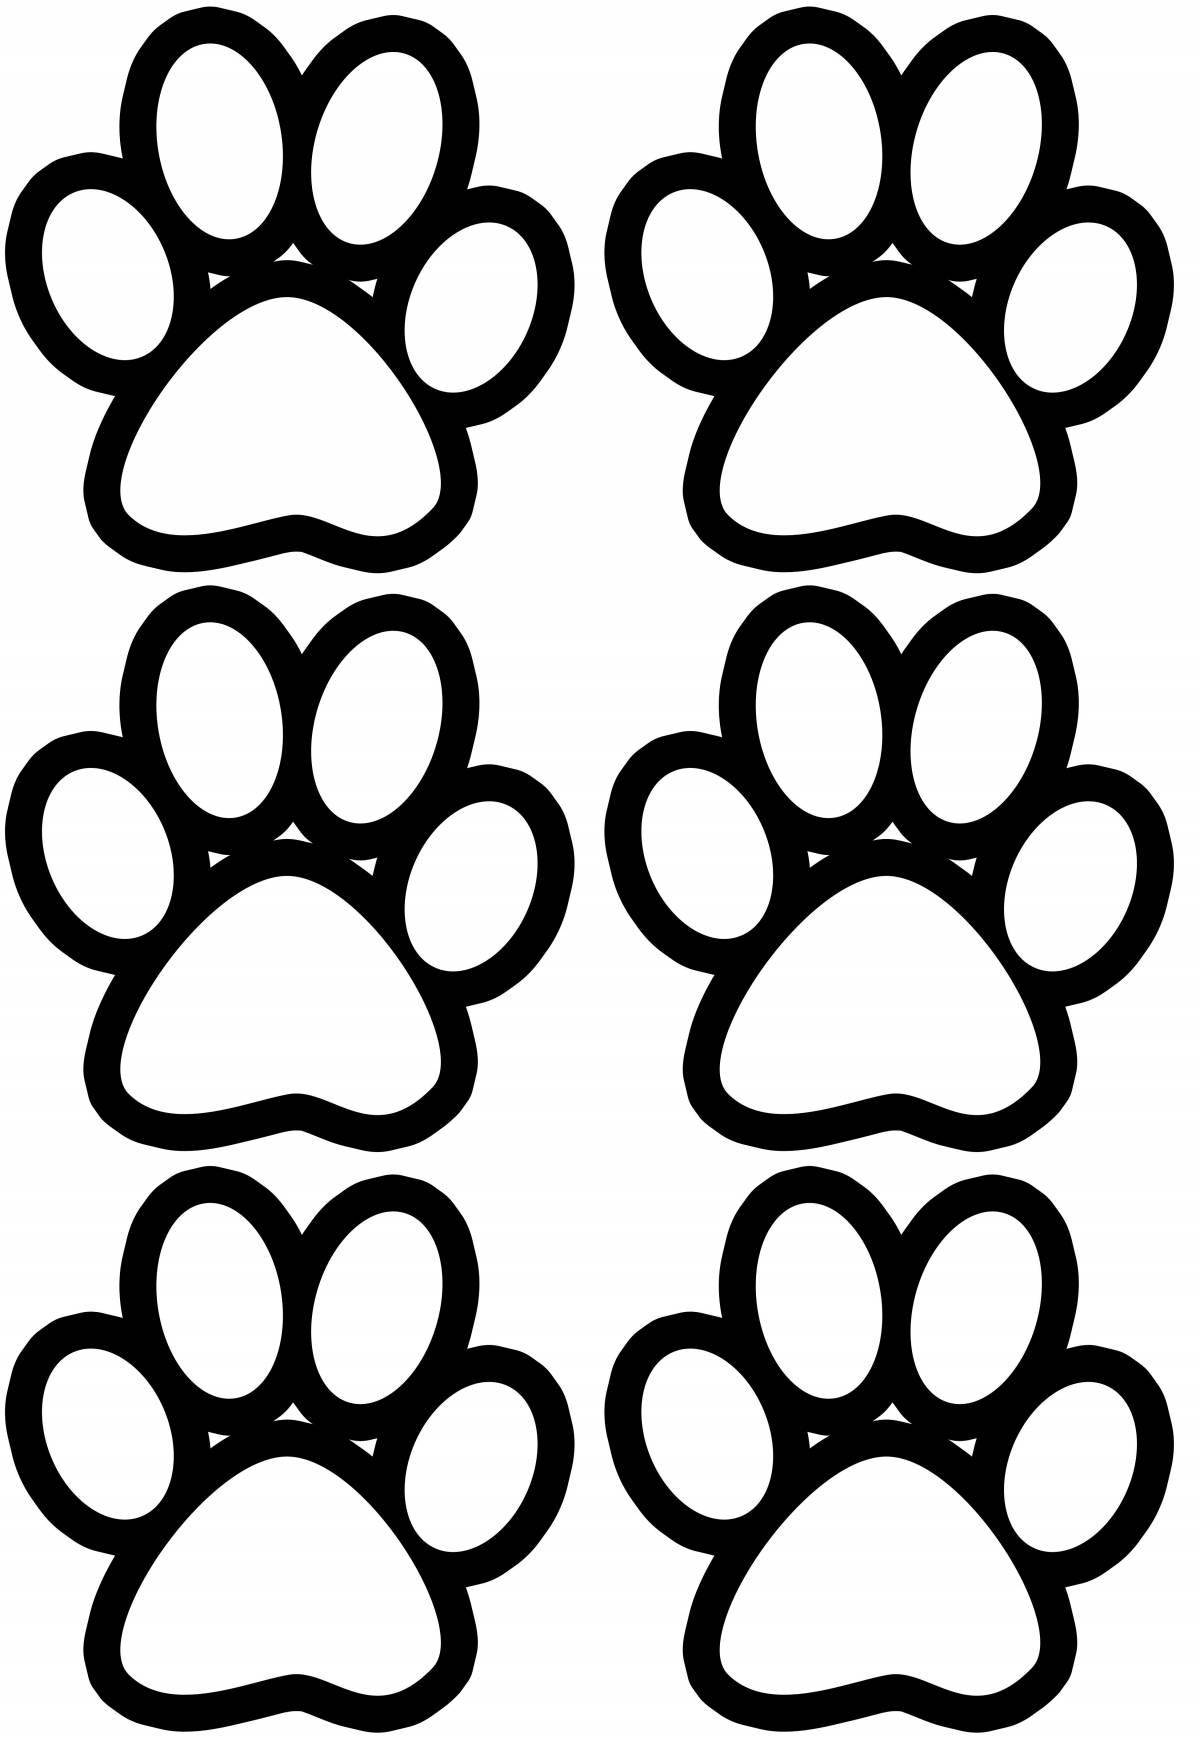 Coloring book gorgeous cat paw